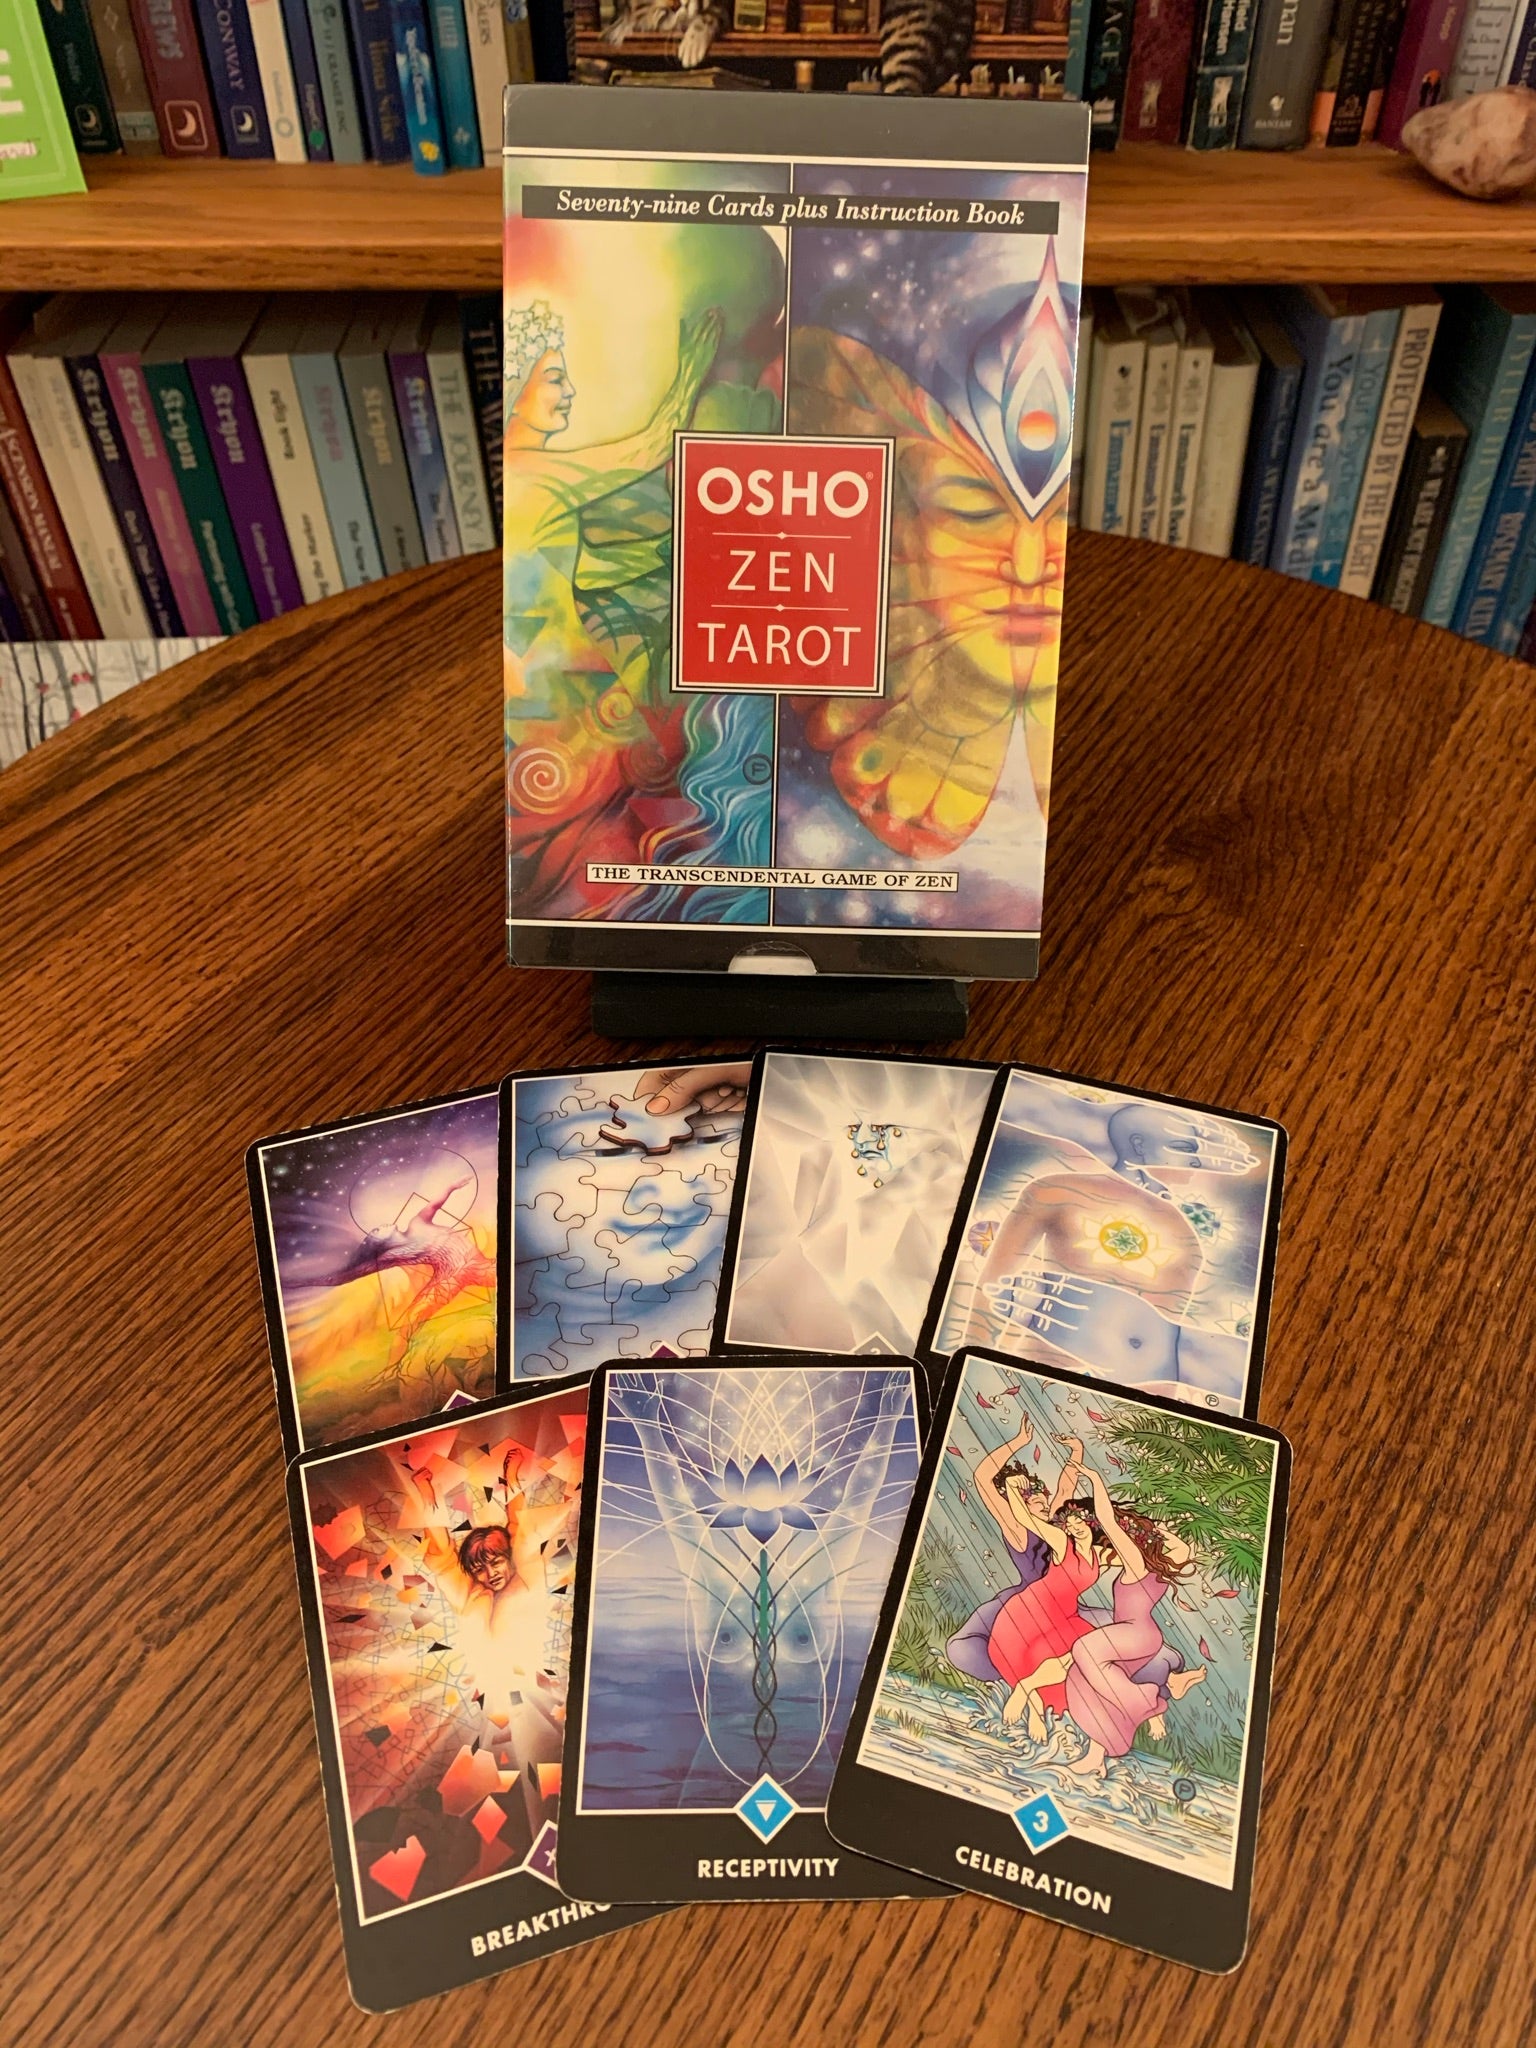 Osho Zen Tarot Deck is beautifully illustrated and an excellent all-around deck for receiving guidance on important questions or issues. The set includes 79 tarot cards (one more than the traditional 78 - the extra card is called "The Master"). This deck consists of the 56 minor arcana and 23 major arcana, but is not a traditional in some other ways - the extra card, the suits (e.g. clouds), etc. It was my go-to deck for many years. Price is $29.99. Photo shows 7 cards and the front of the deck box.